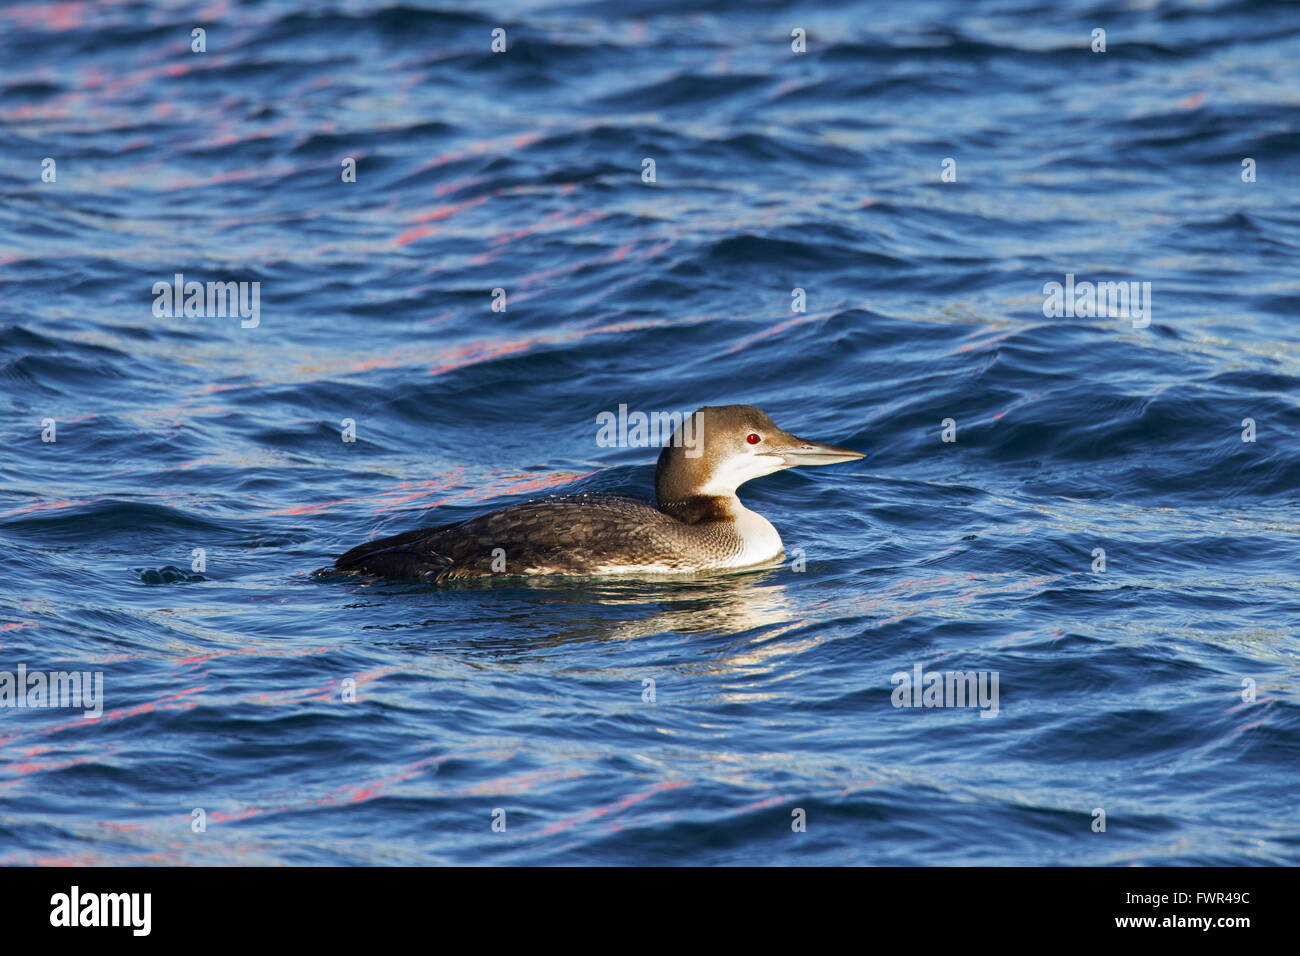 Common loon / great northern diver / great northern loon (Gavia immer) swimming at sea in winter Stock Photo